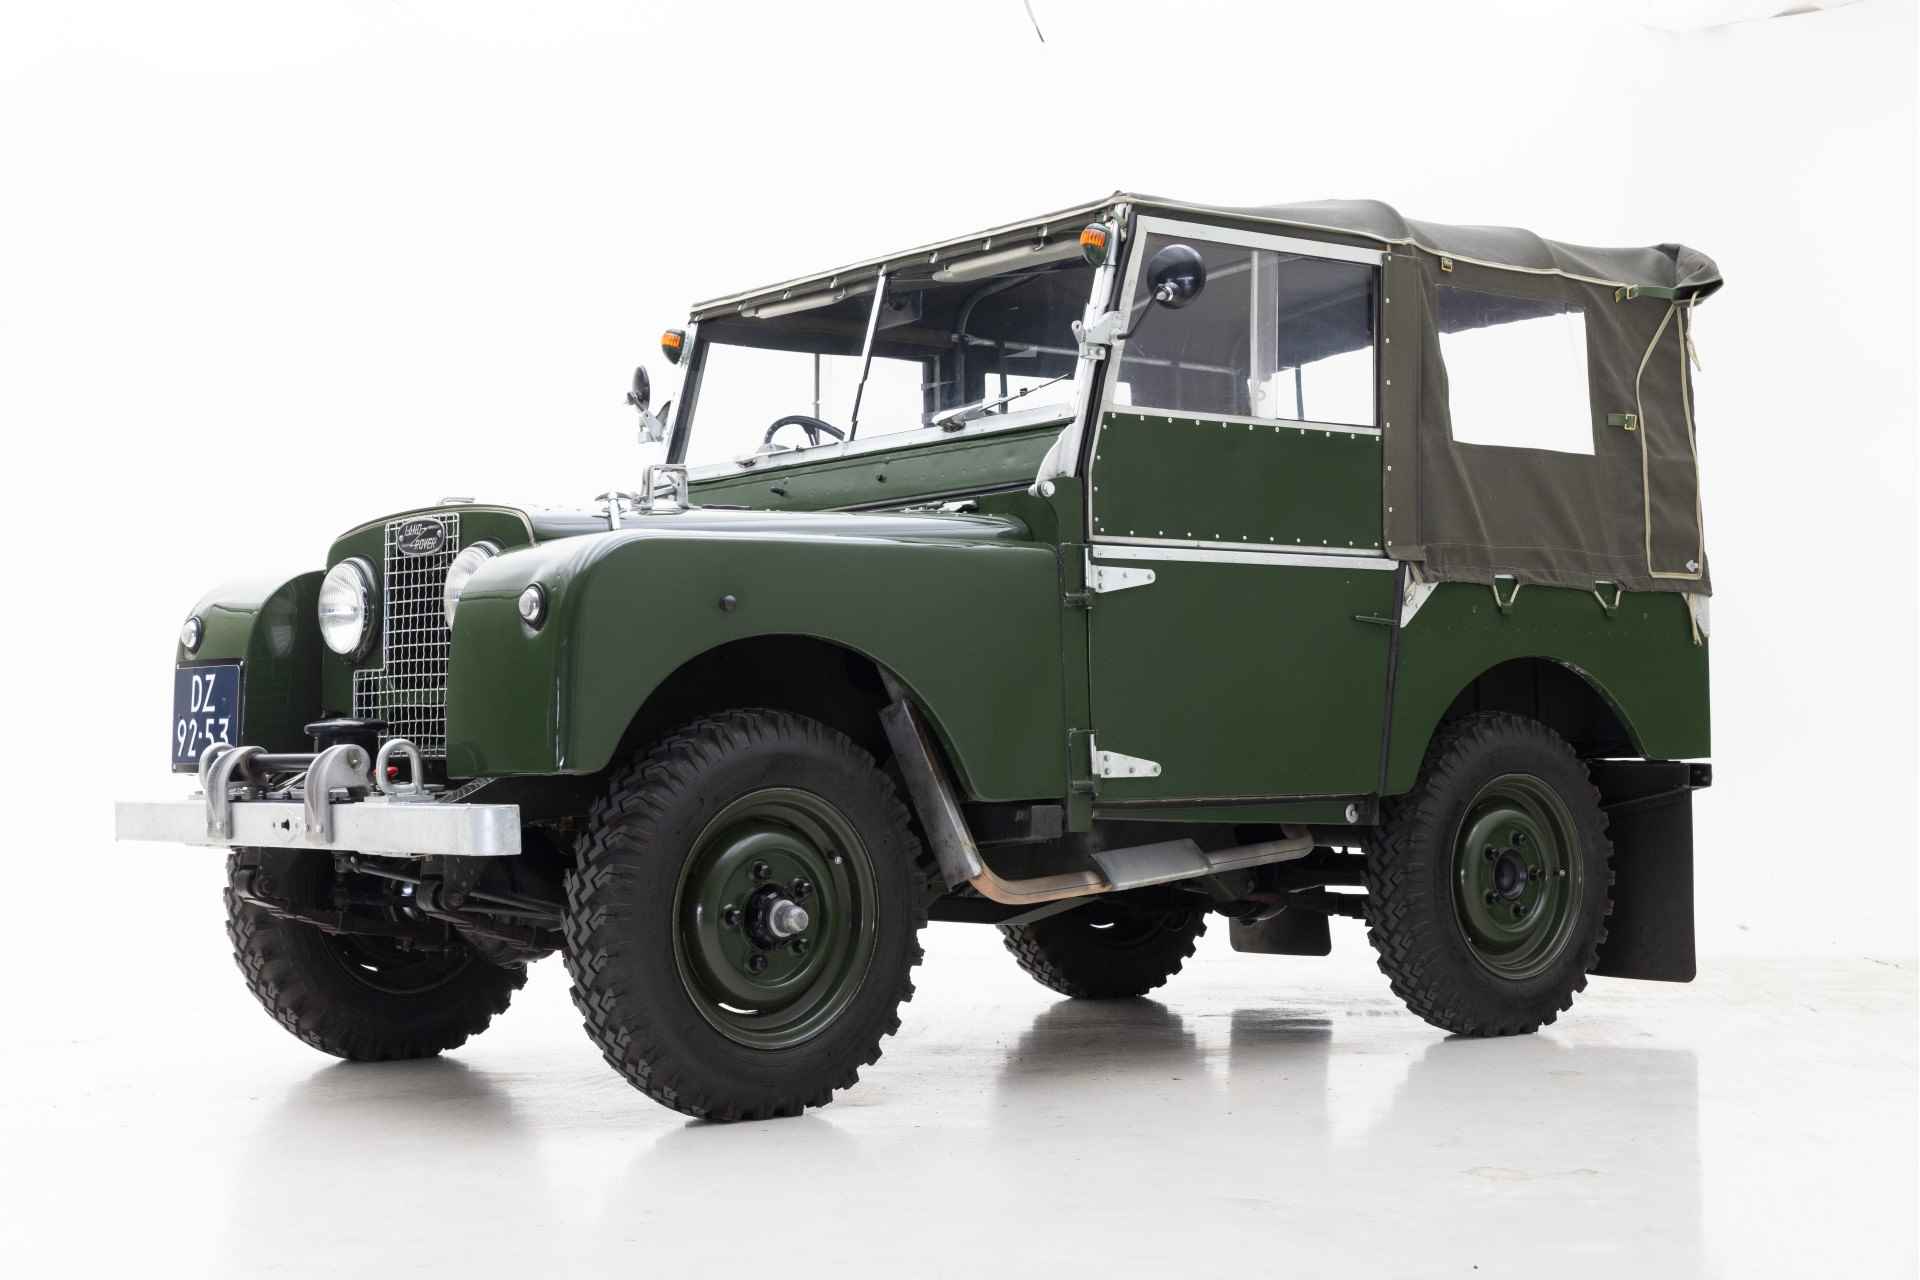 1952 Land Rover Series 1 80-inch - 1/36